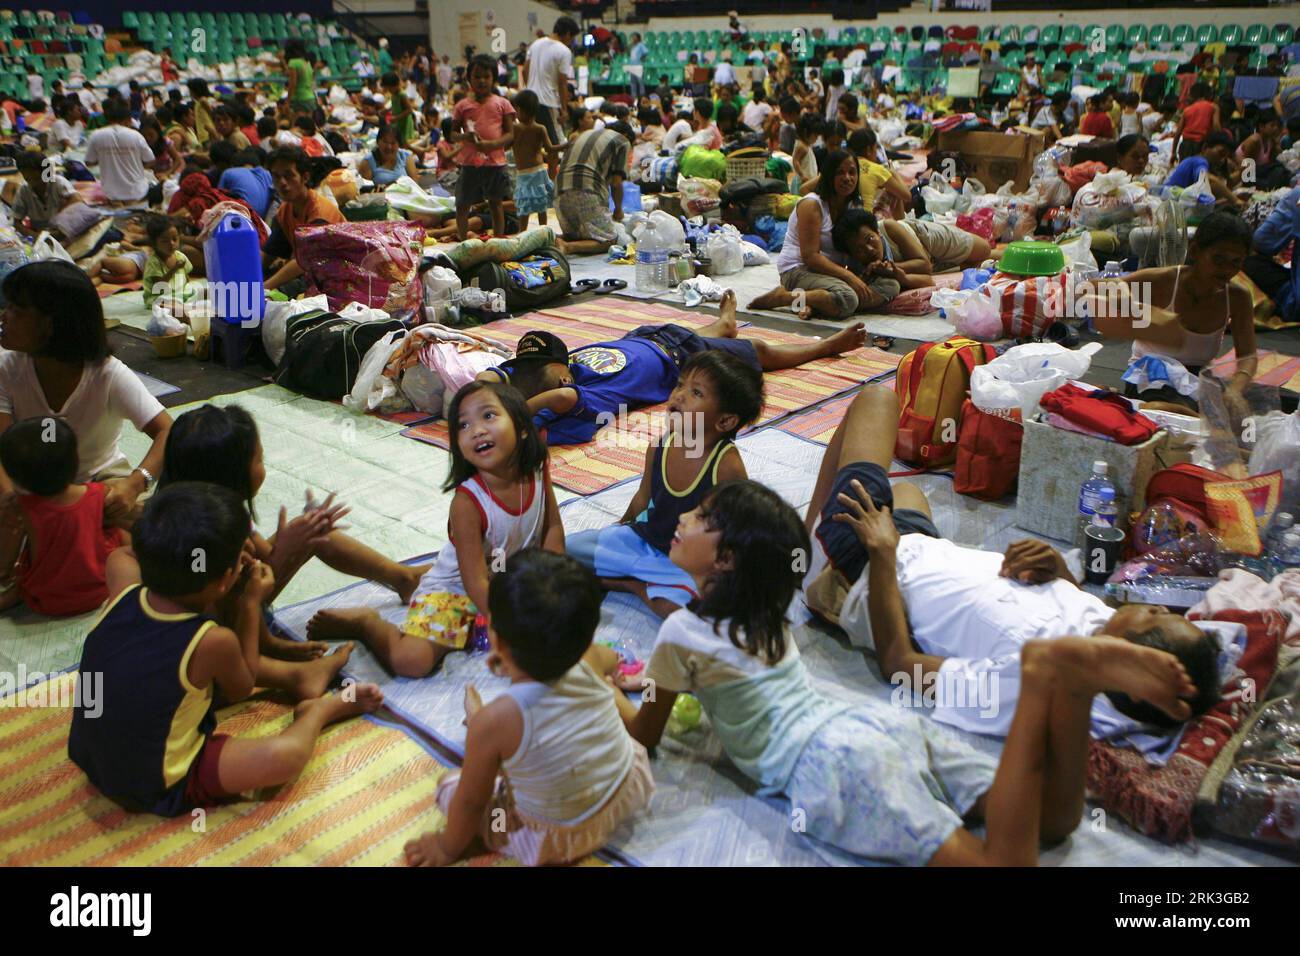 Bildnummer: 53506501  Datum: 05.10.2009  Copyright: imago/Xinhua (091005) -- MANILA, Oct. 5, 2009 (Xinhua) -- Filipino flood evacuees are seen at a sports complex of a school used as evacuation center in Pasig City, east of Manila, capital of the Philippines, on Oct. 5, 2009. Over 3 millionare still struggling to recover from floods brought on by Typhoon Ketsana that hit Metro Manila and surrounding provinces in recent days, while at least 17were killed when typhoon Parma pummelled the north-eastern Philippines since Oct. 3. (Xinhua/Luis Liwanag) (lr) (5)THE PHILIPPINES-TYPHOON-AFTERMATH PUBLI Stock Photo